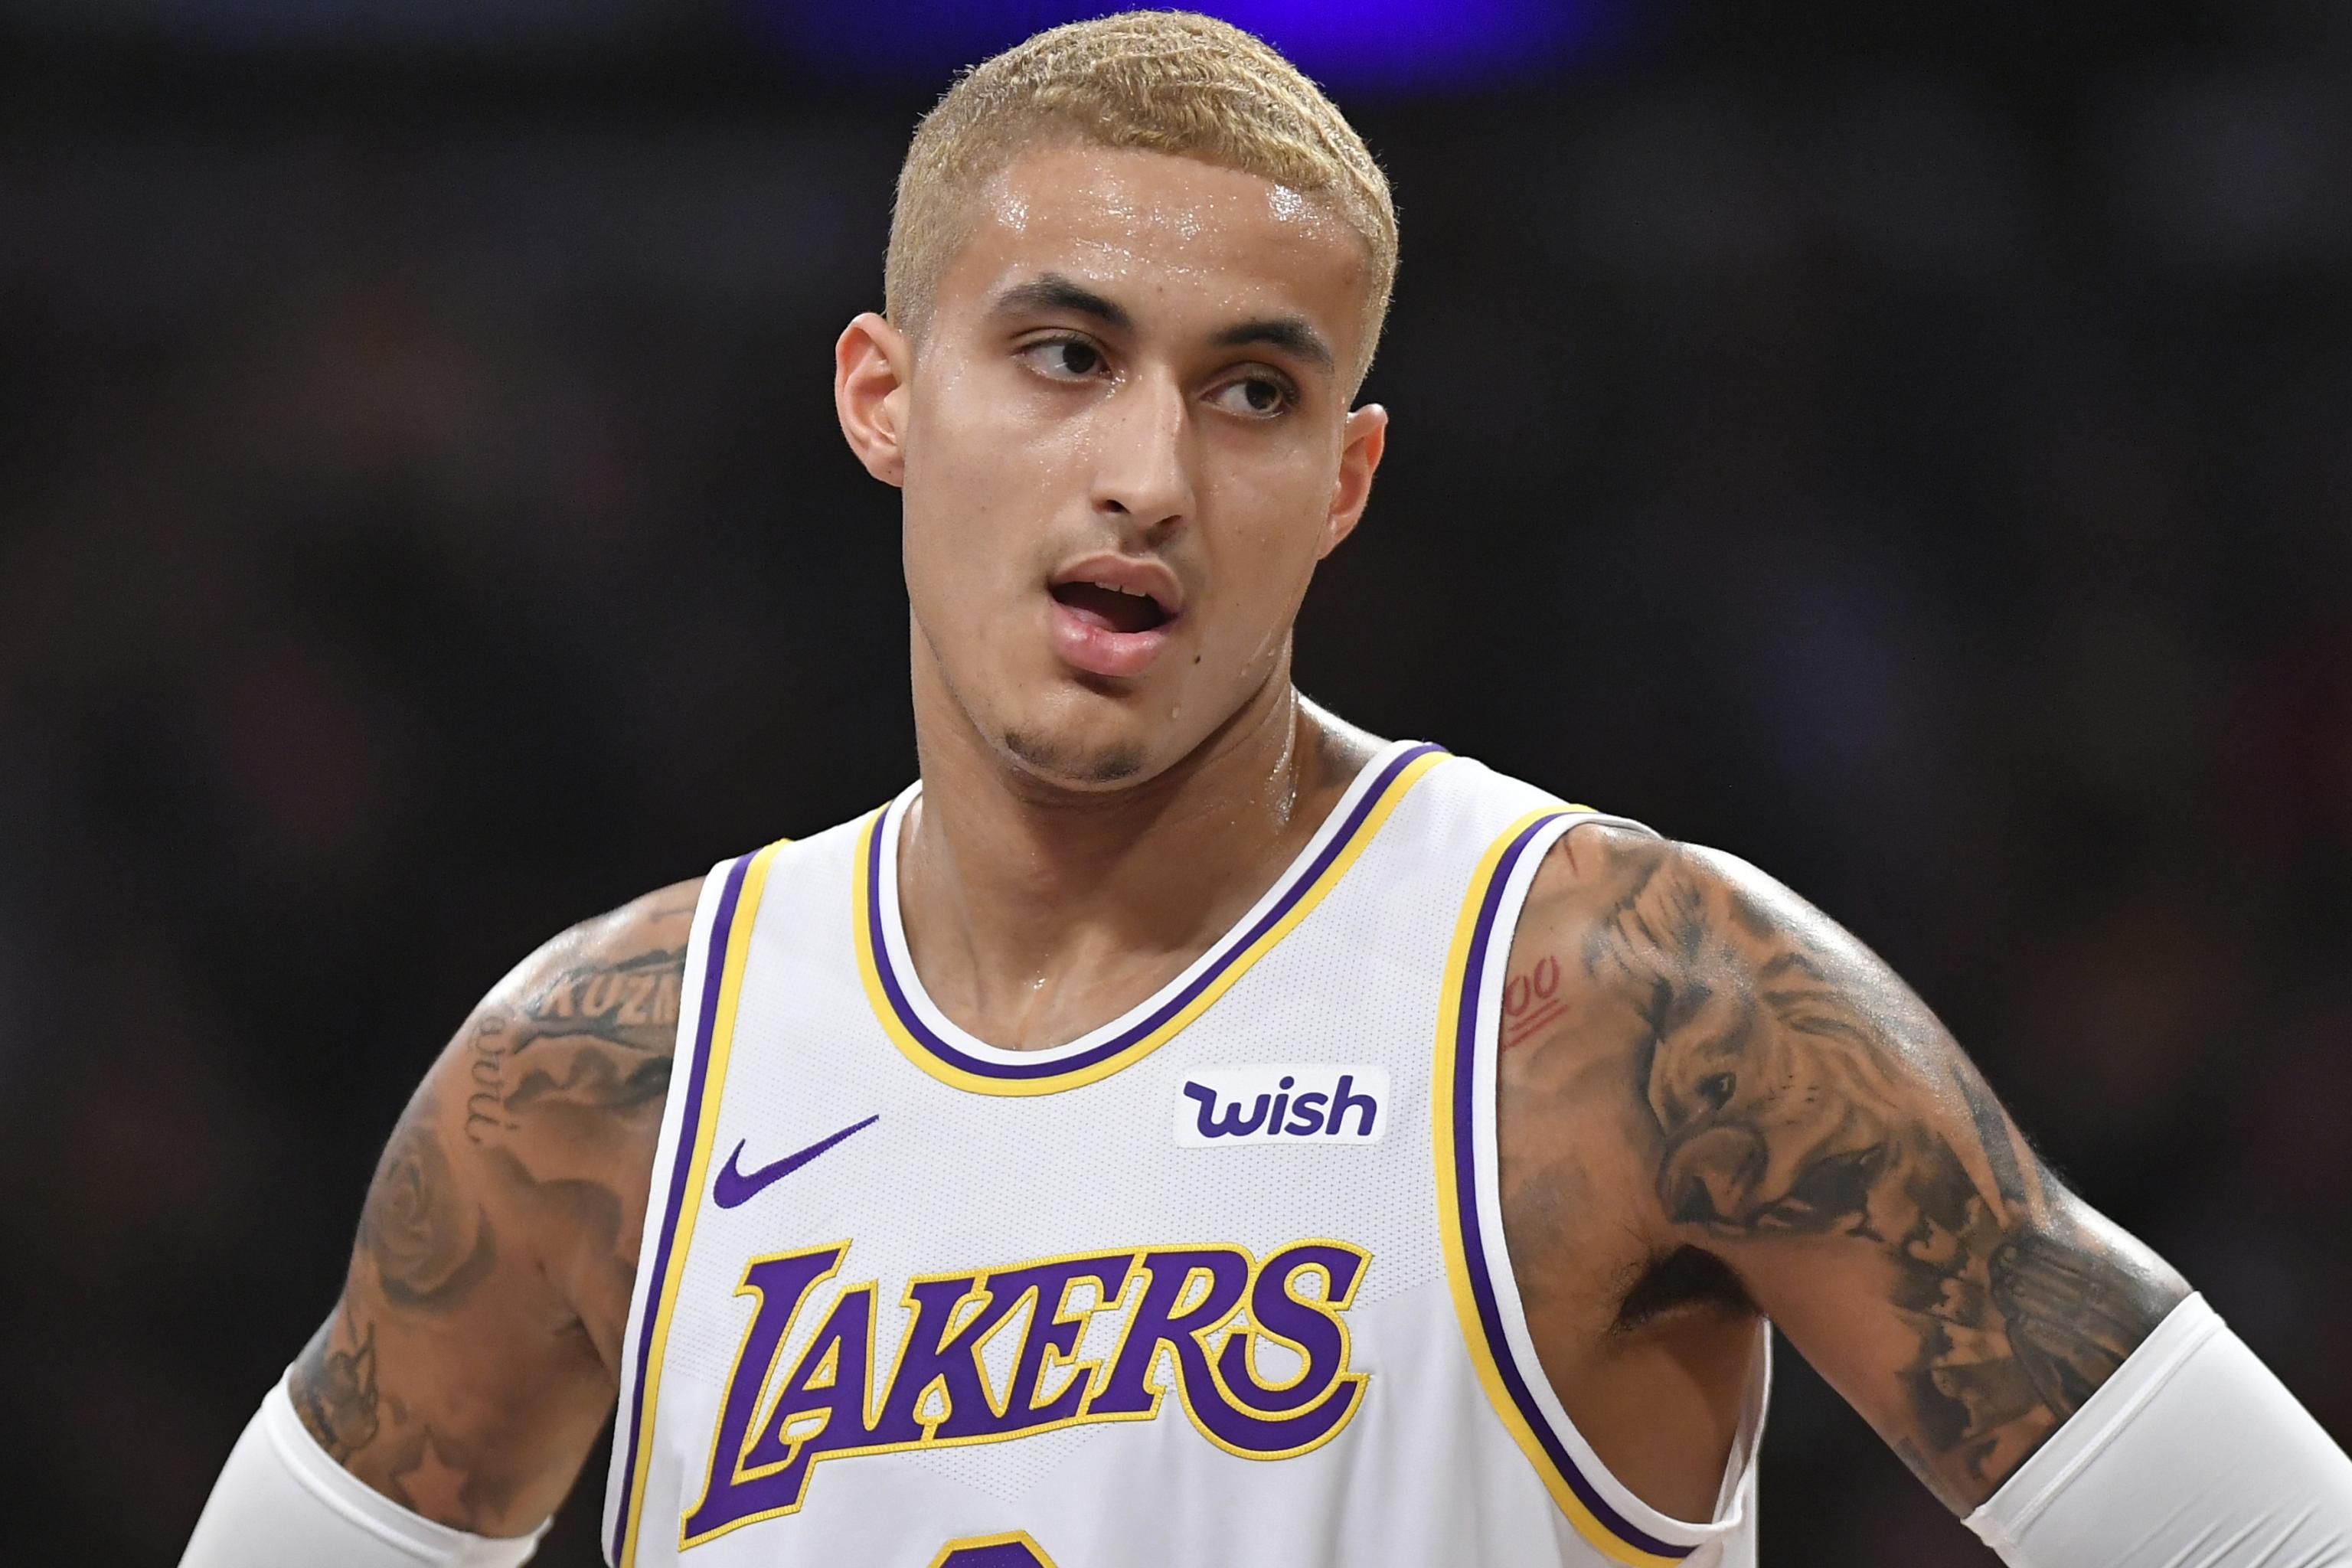 Nba Trade Rumors Latest On Lakers Kyle Kuzma T Wolves And More Bleacher Report Latest News Videos And Highlights